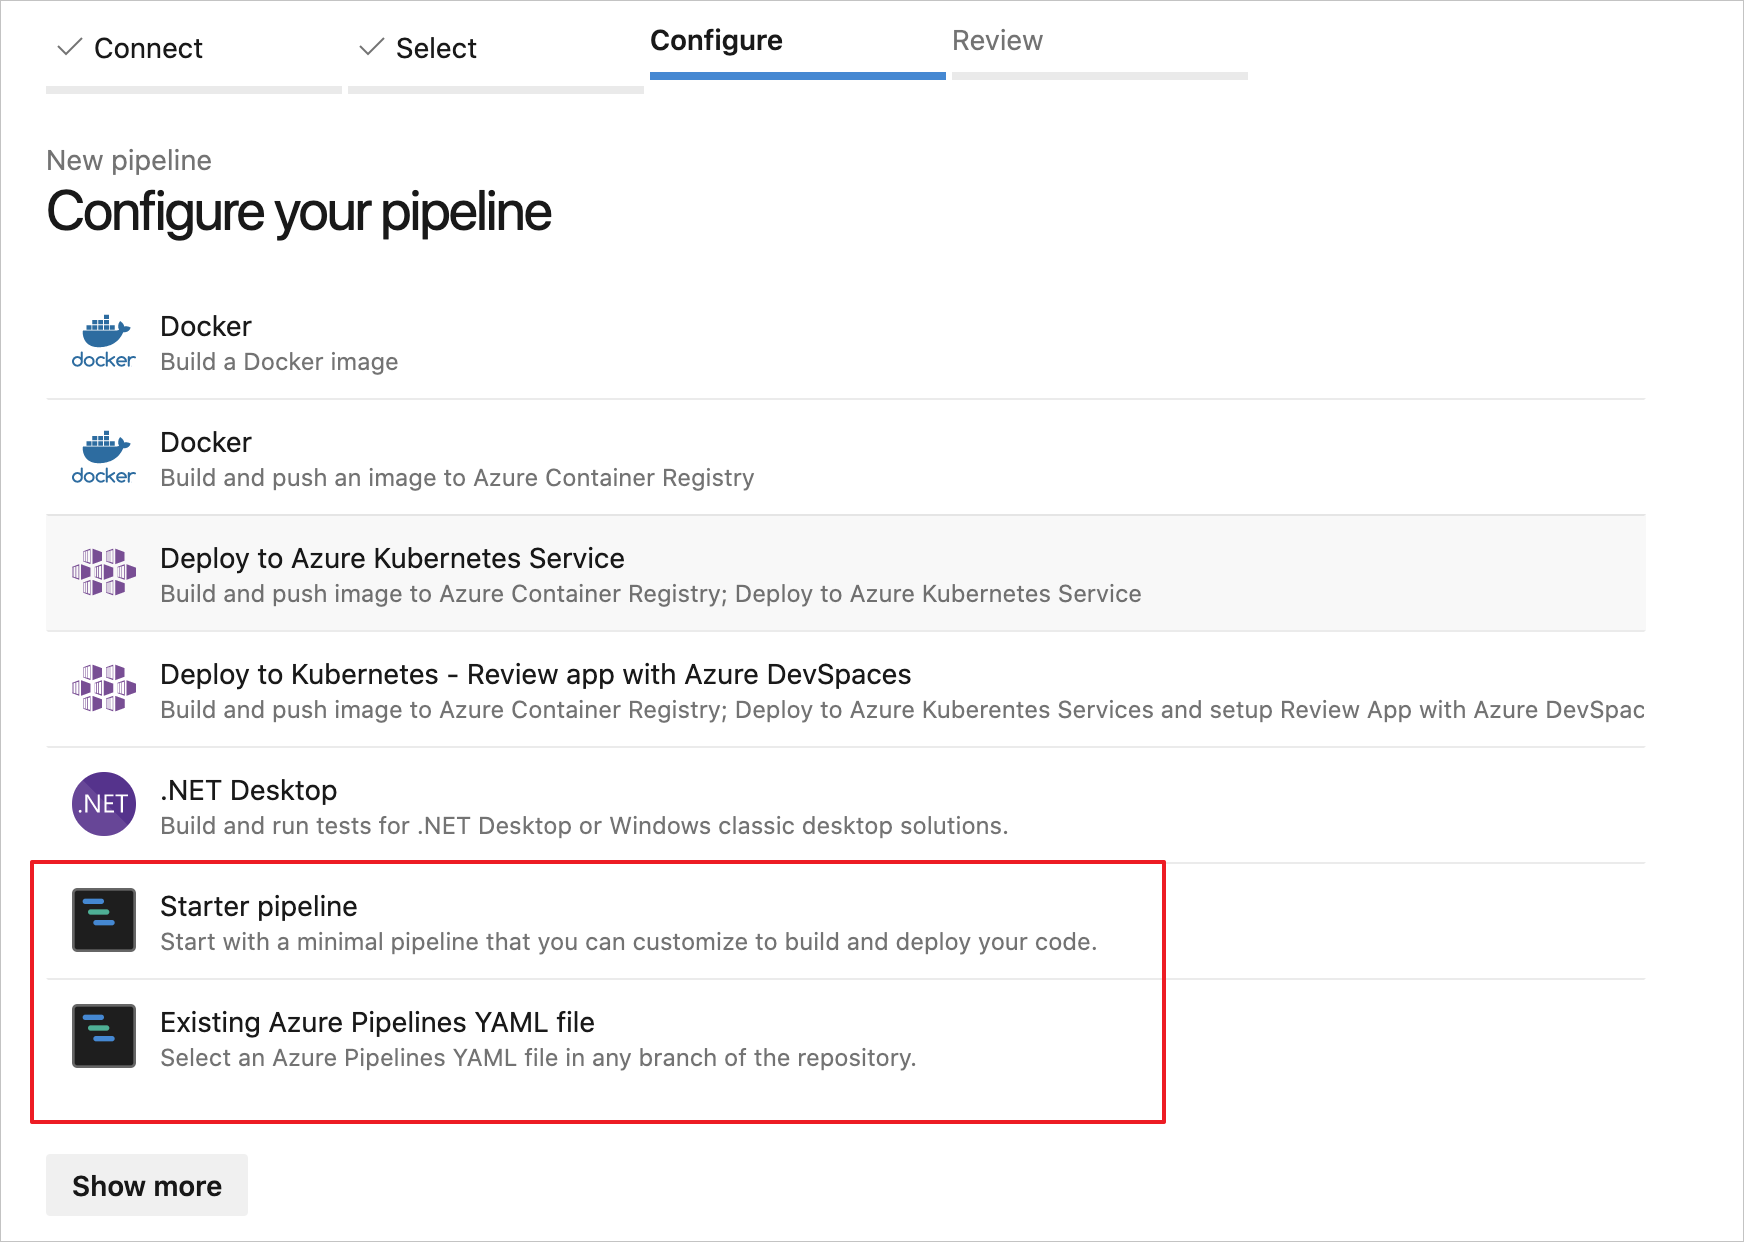 Select Starter pipeline or Existing Azure Pipelines YAML file to begin your build pipeline